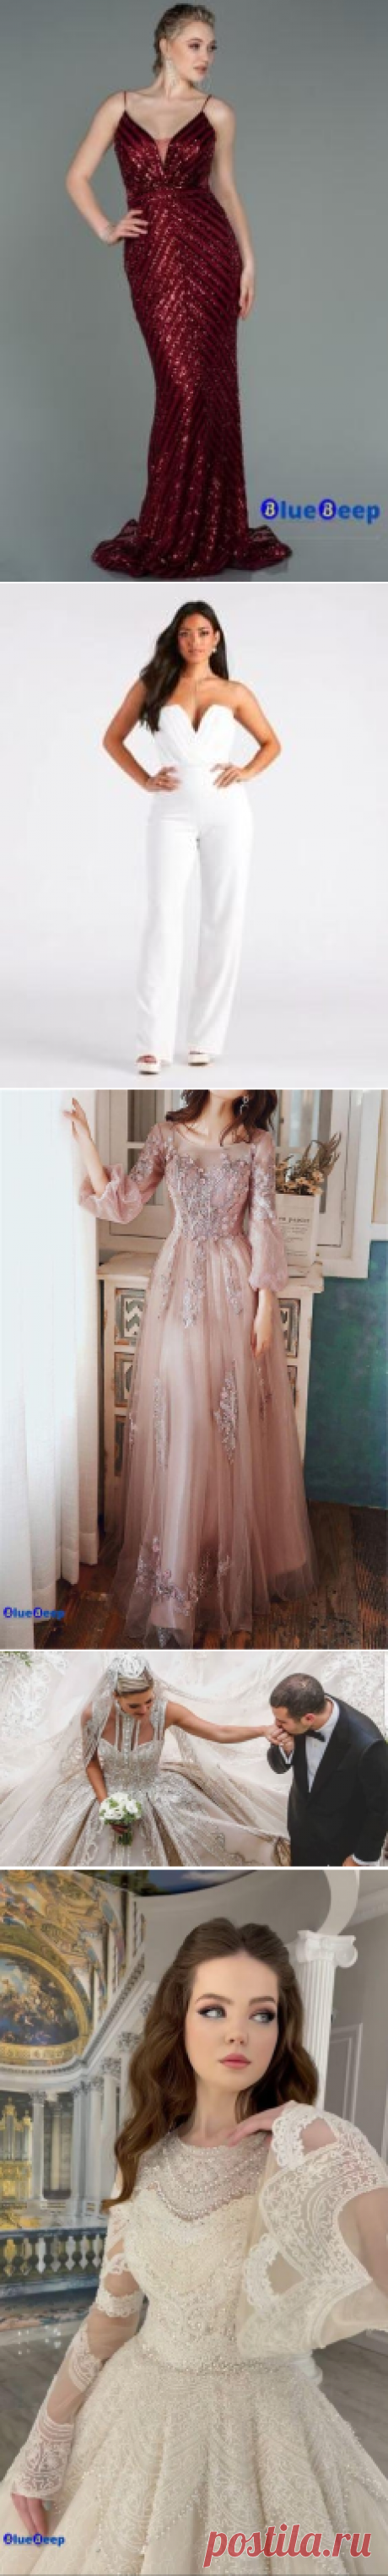 Elegant and Modest Soiree Dresses: Graceful Choices for Special Events